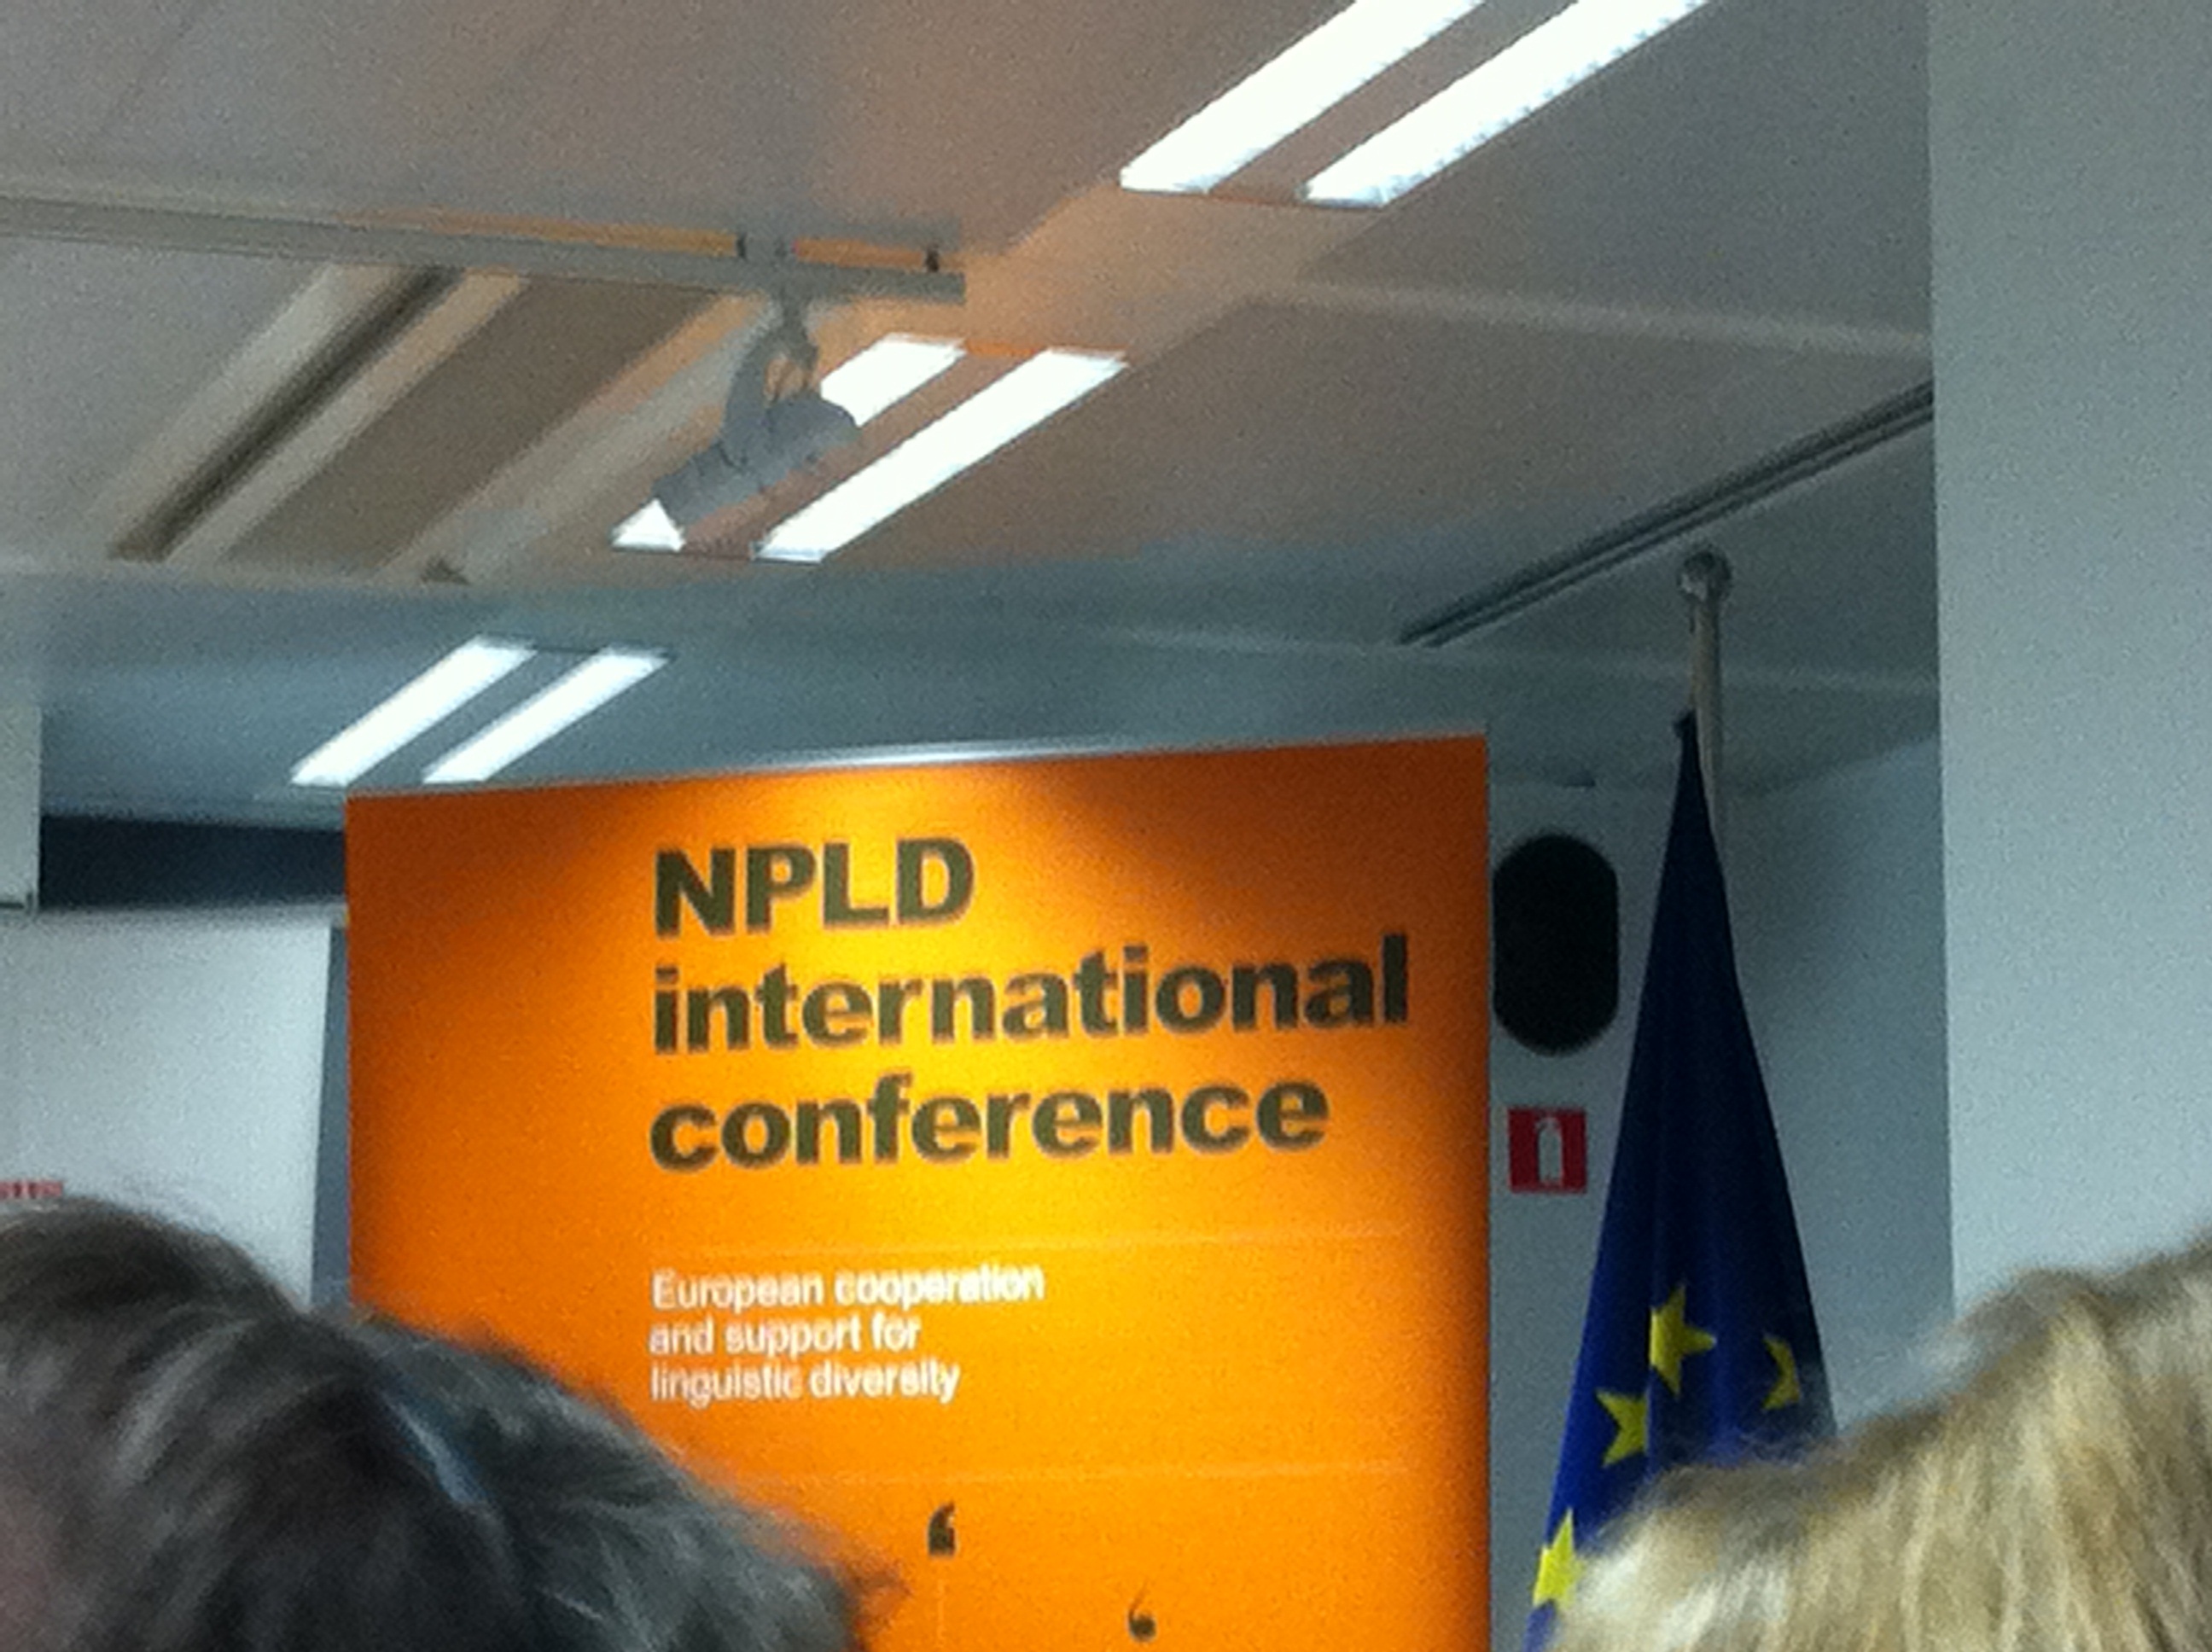 ABTTF attended the Annual NPLD Conference 2013